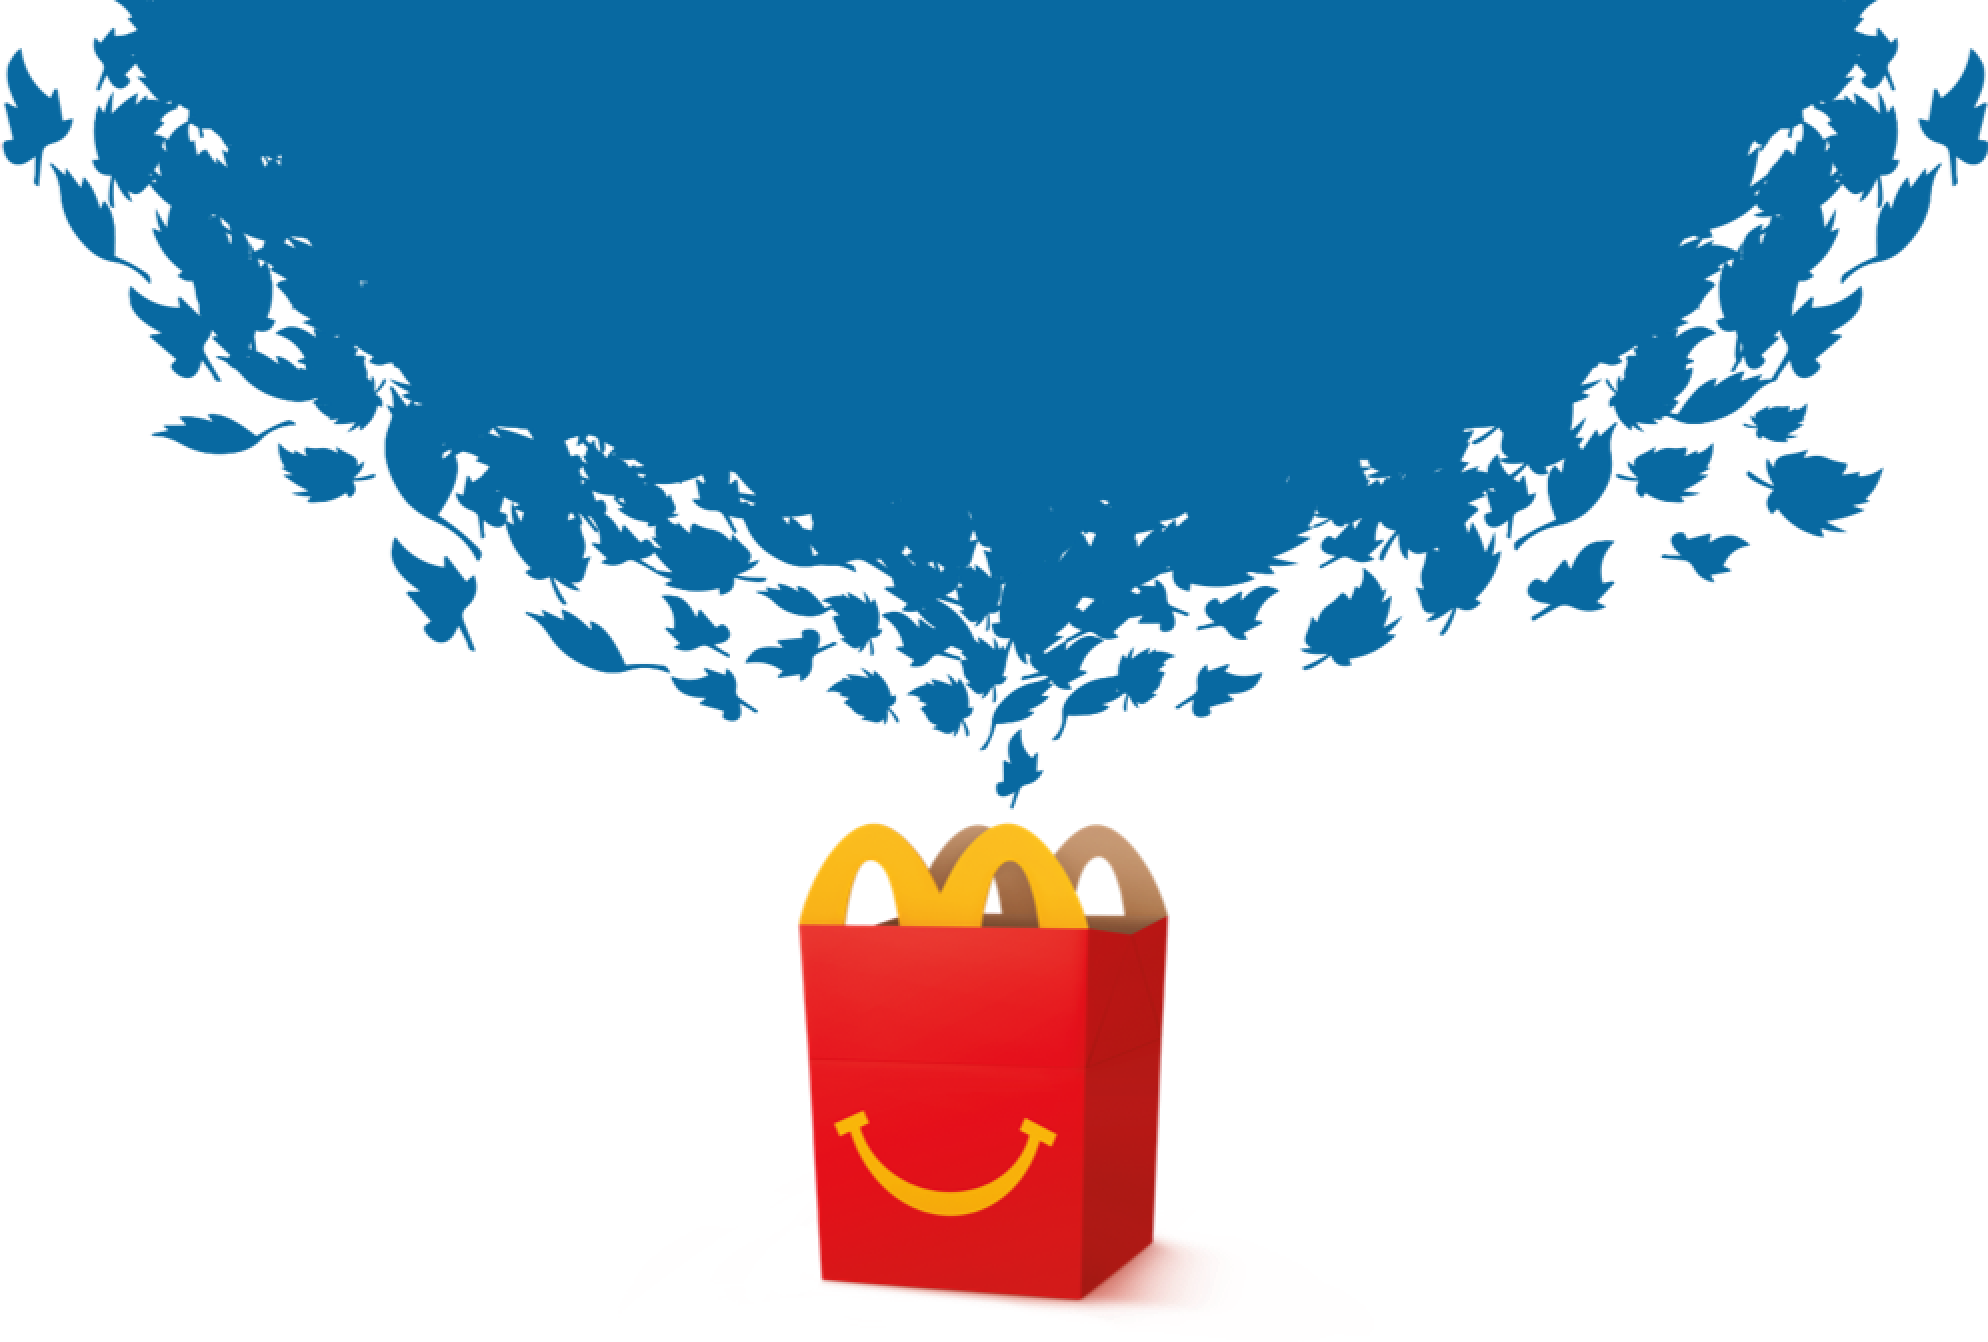 A Red And Yellow Fast Food Bag With Blue And Black Leaves